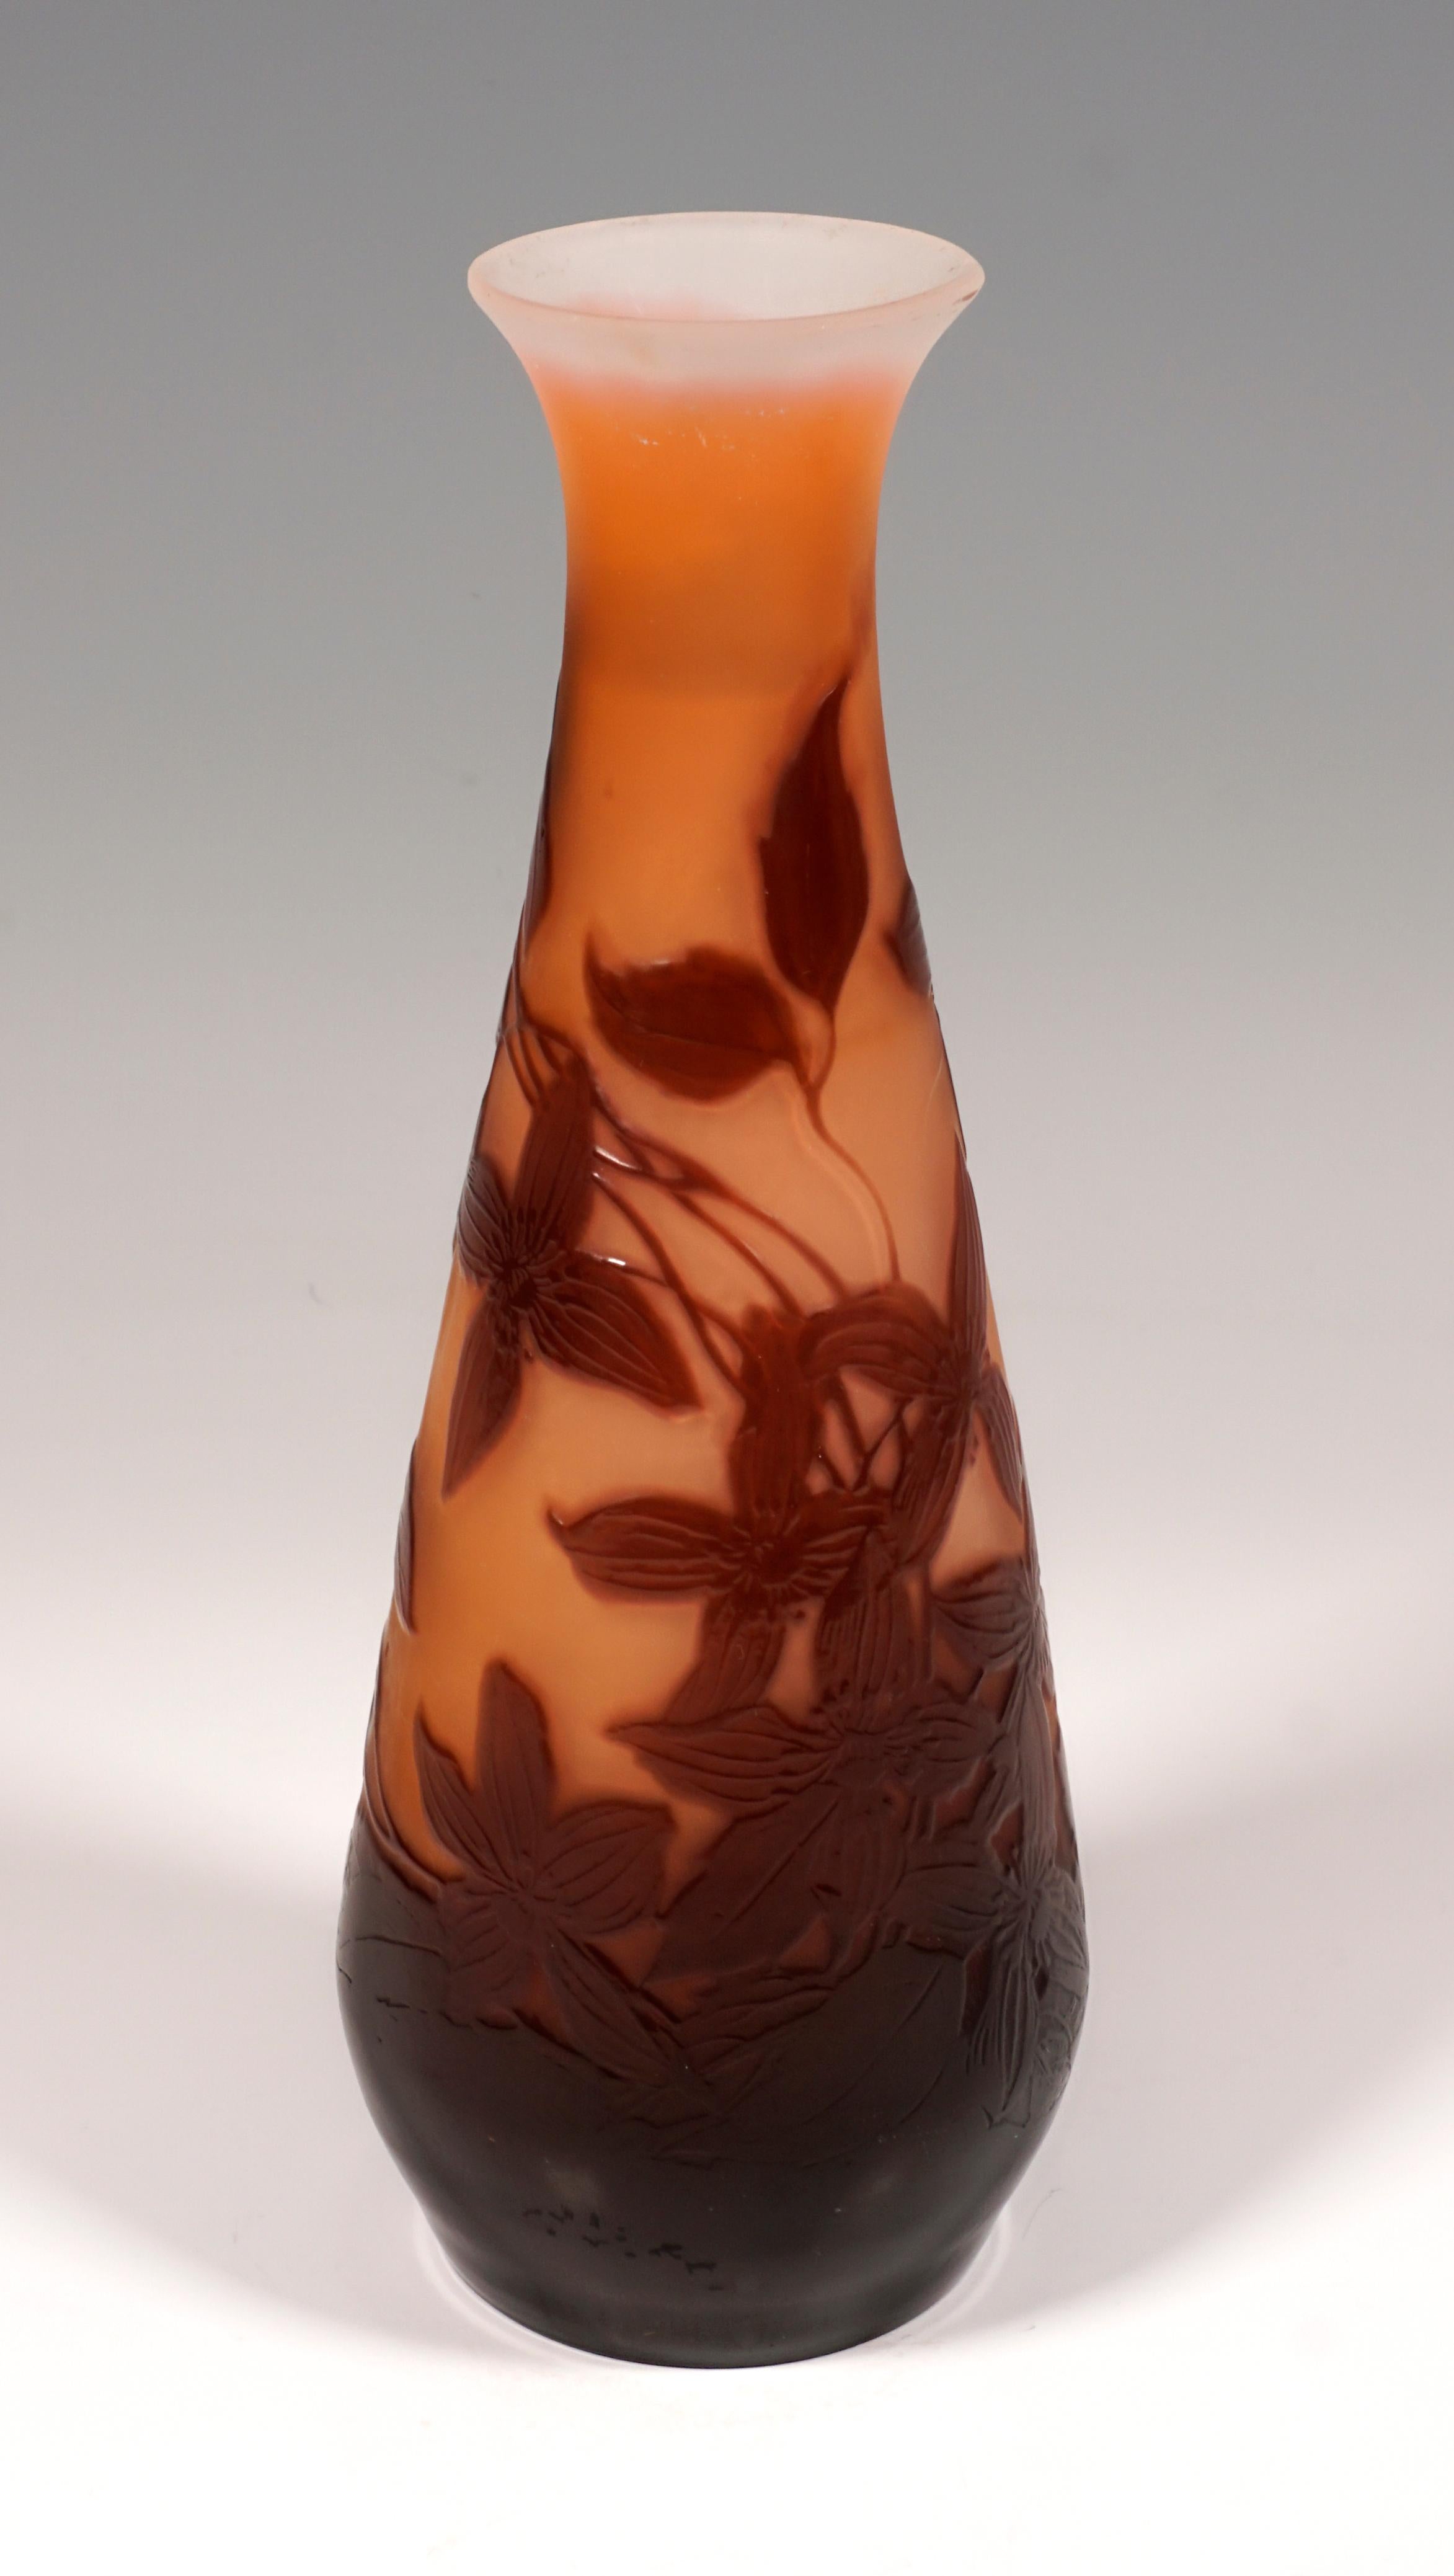 Art Nouveau Flacon Shape Vase with Clematis Decor, Émile Gallé, France 1903/04 In Good Condition For Sale In Vienna, AT